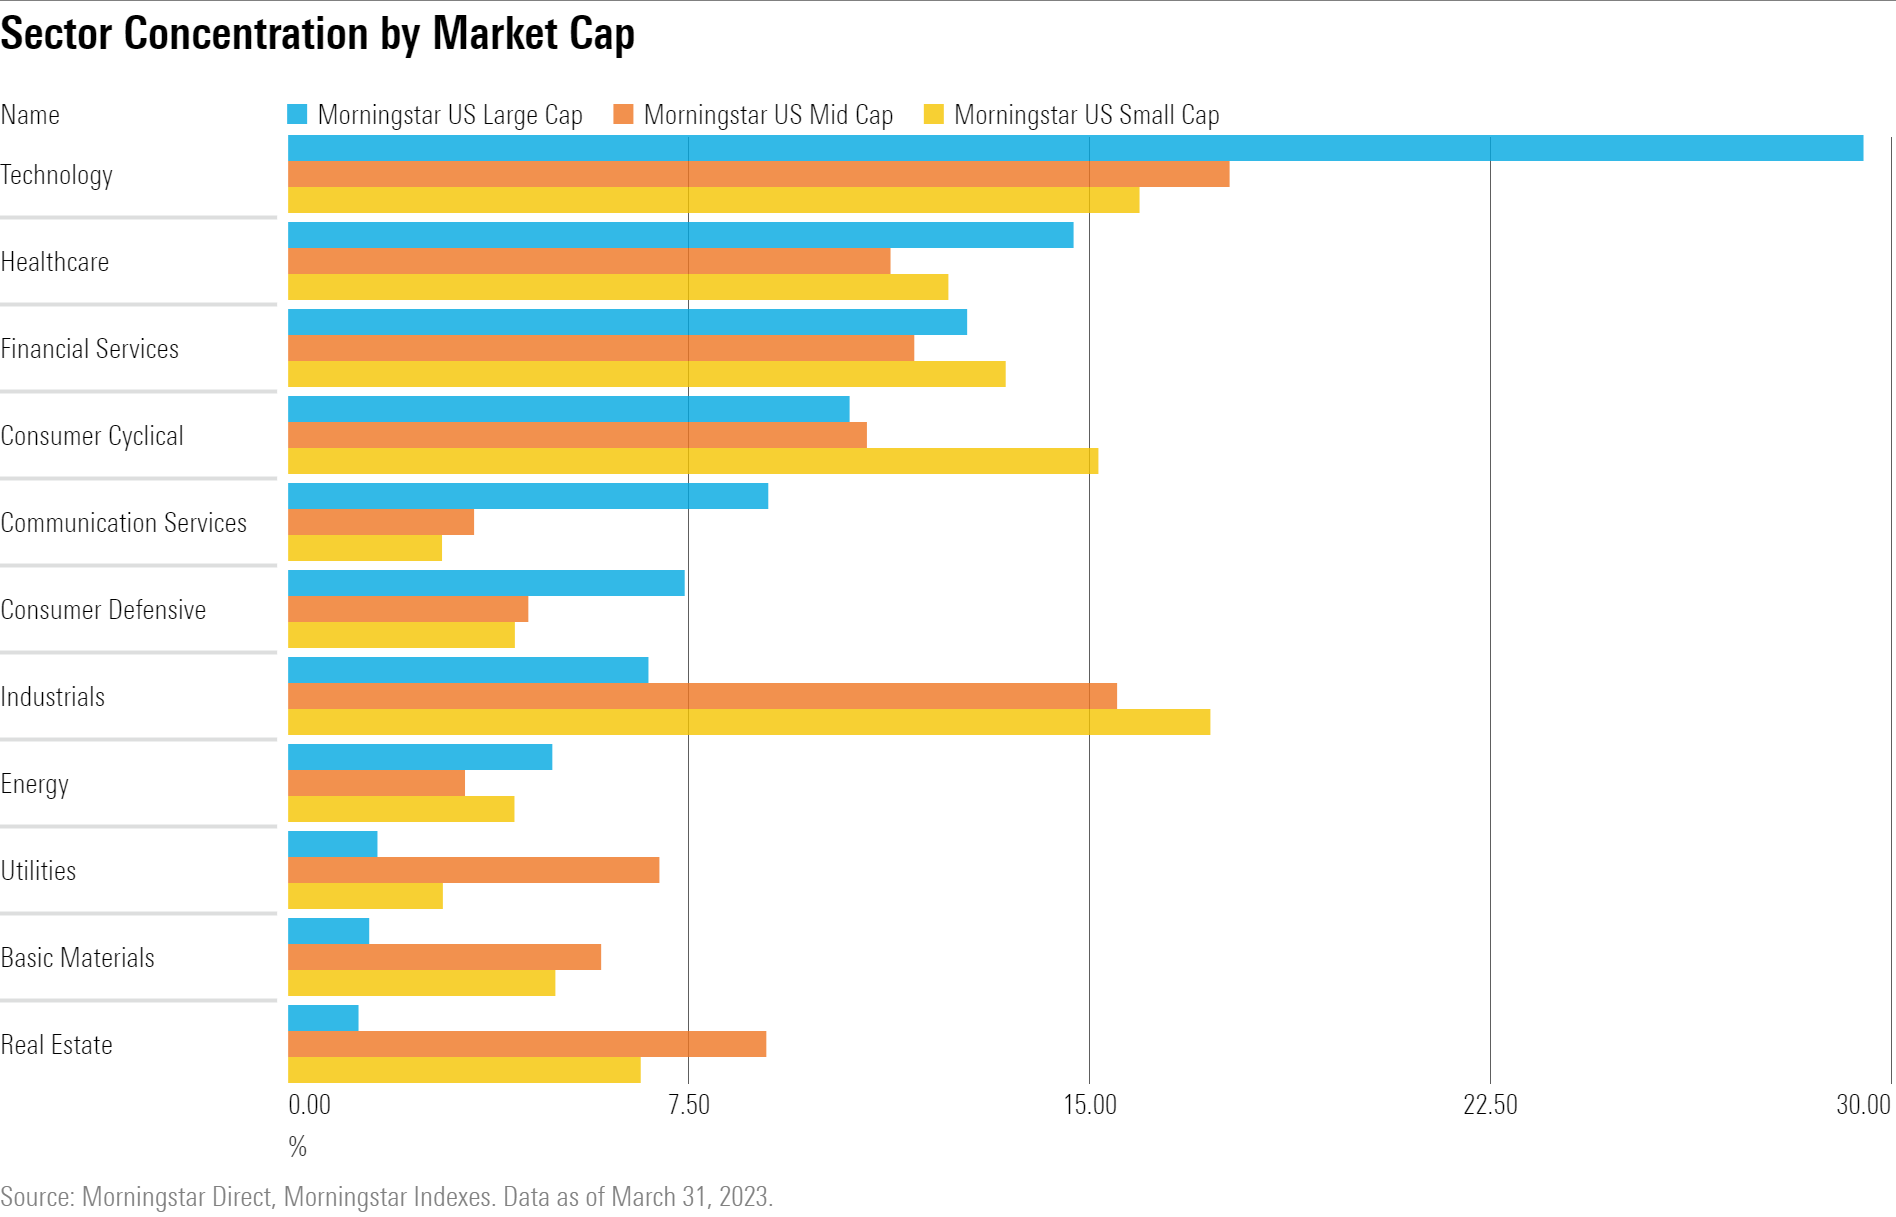 Horizontal bar chart showing sector concentration for the Morningstar US Large Cap, Mid Cap, and Small Cap indexes.